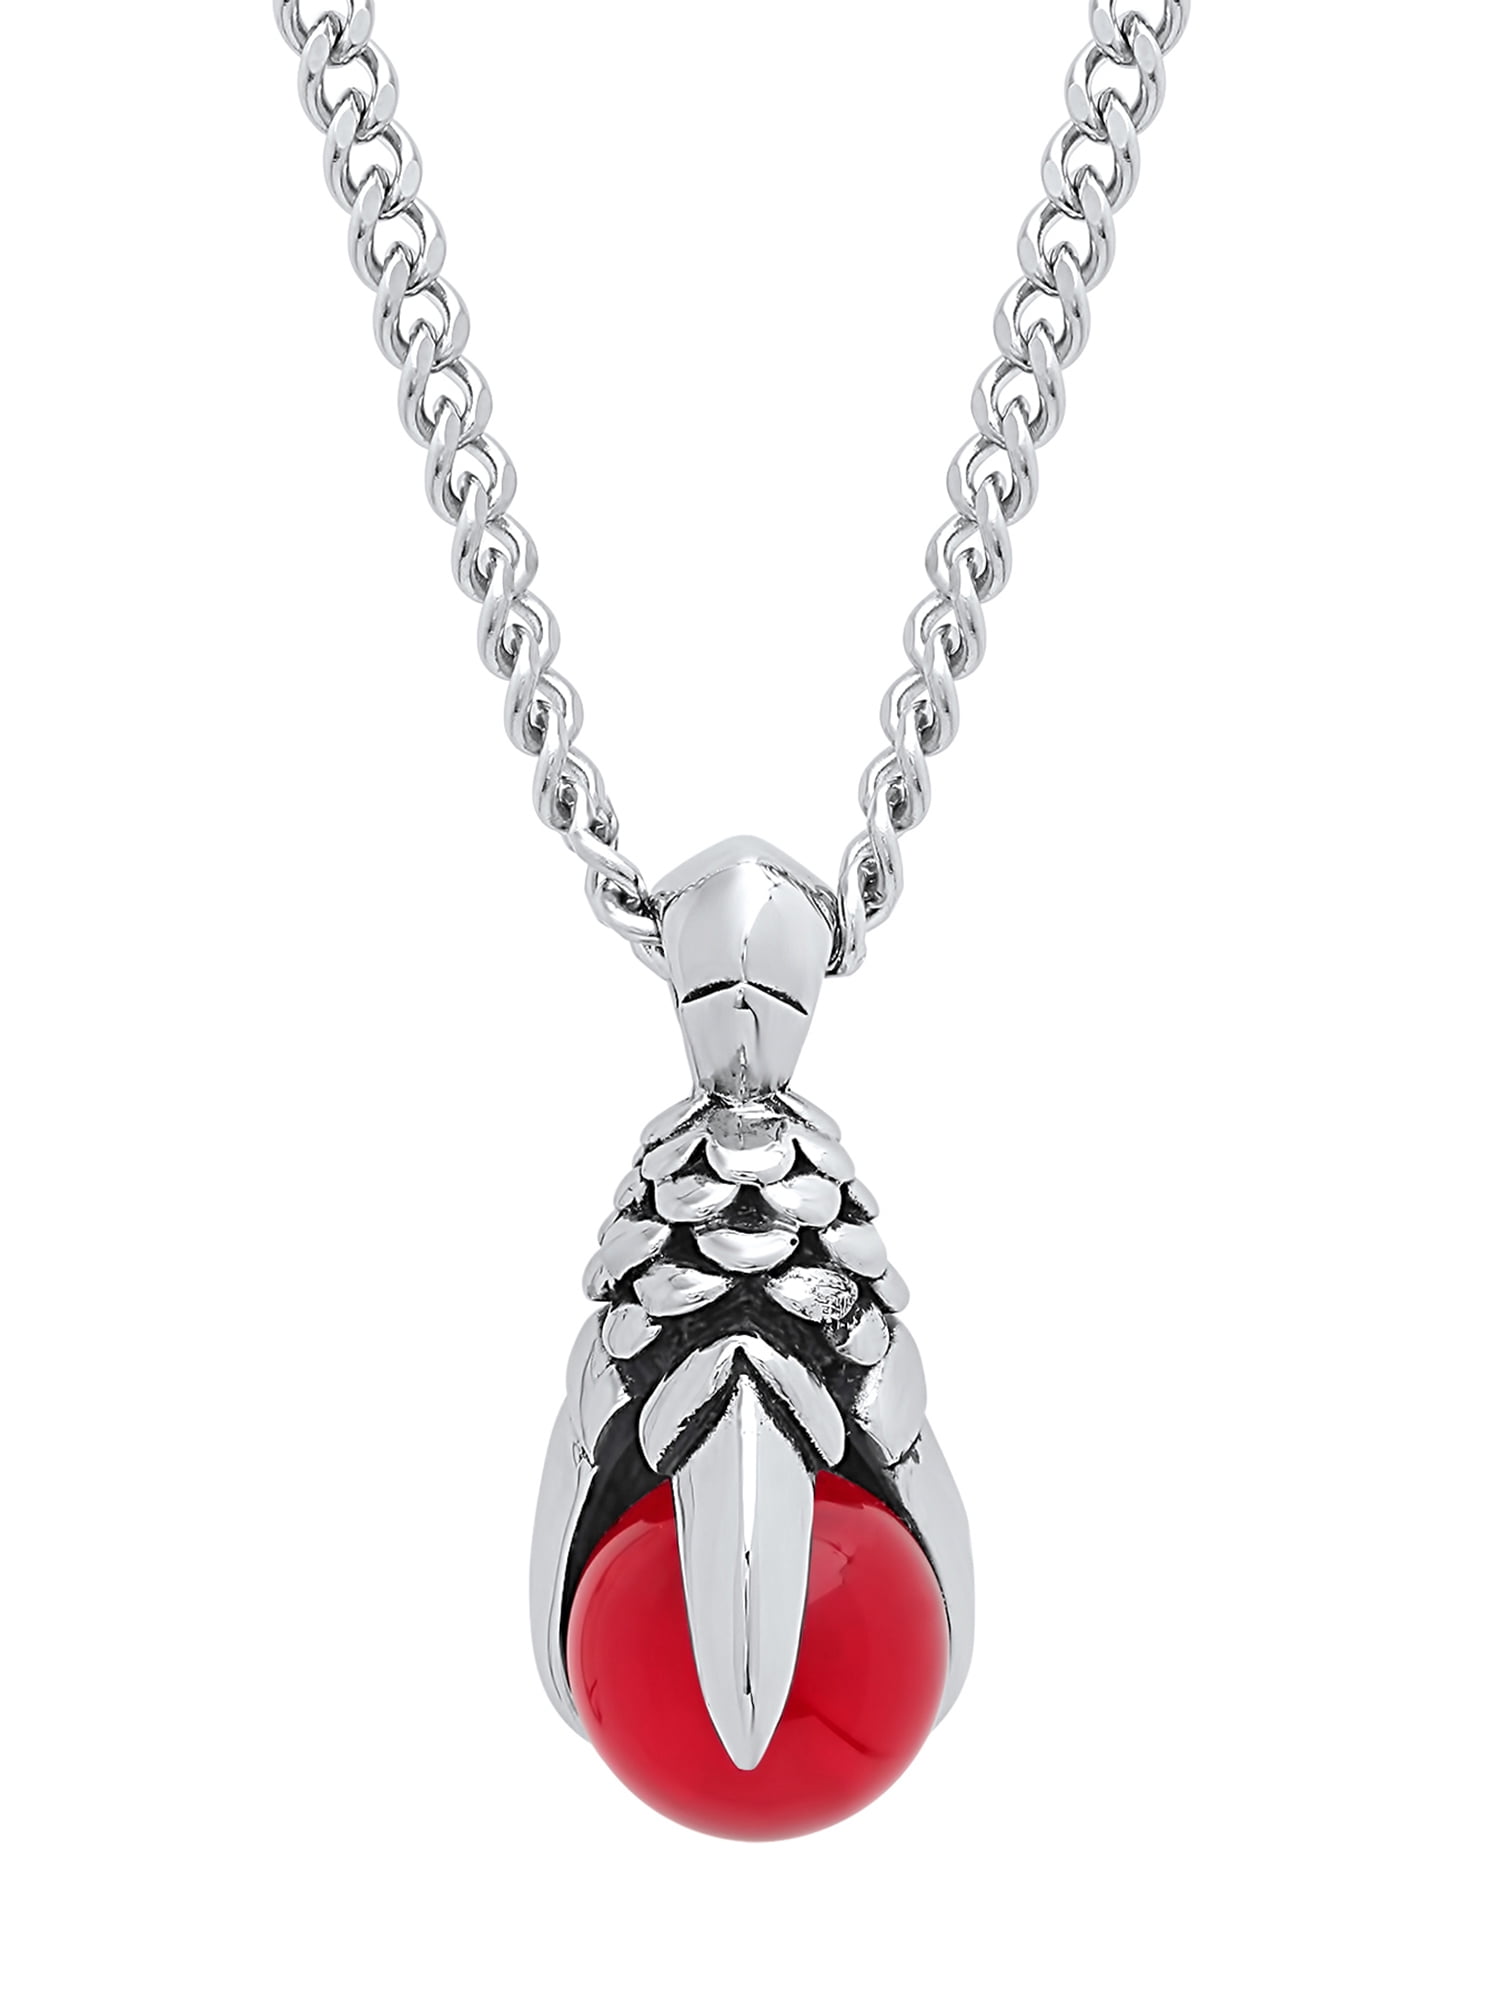 Believe by Brilliance Men's Stainless Steel Gothic Red Crystal Claw Pendant Necklace